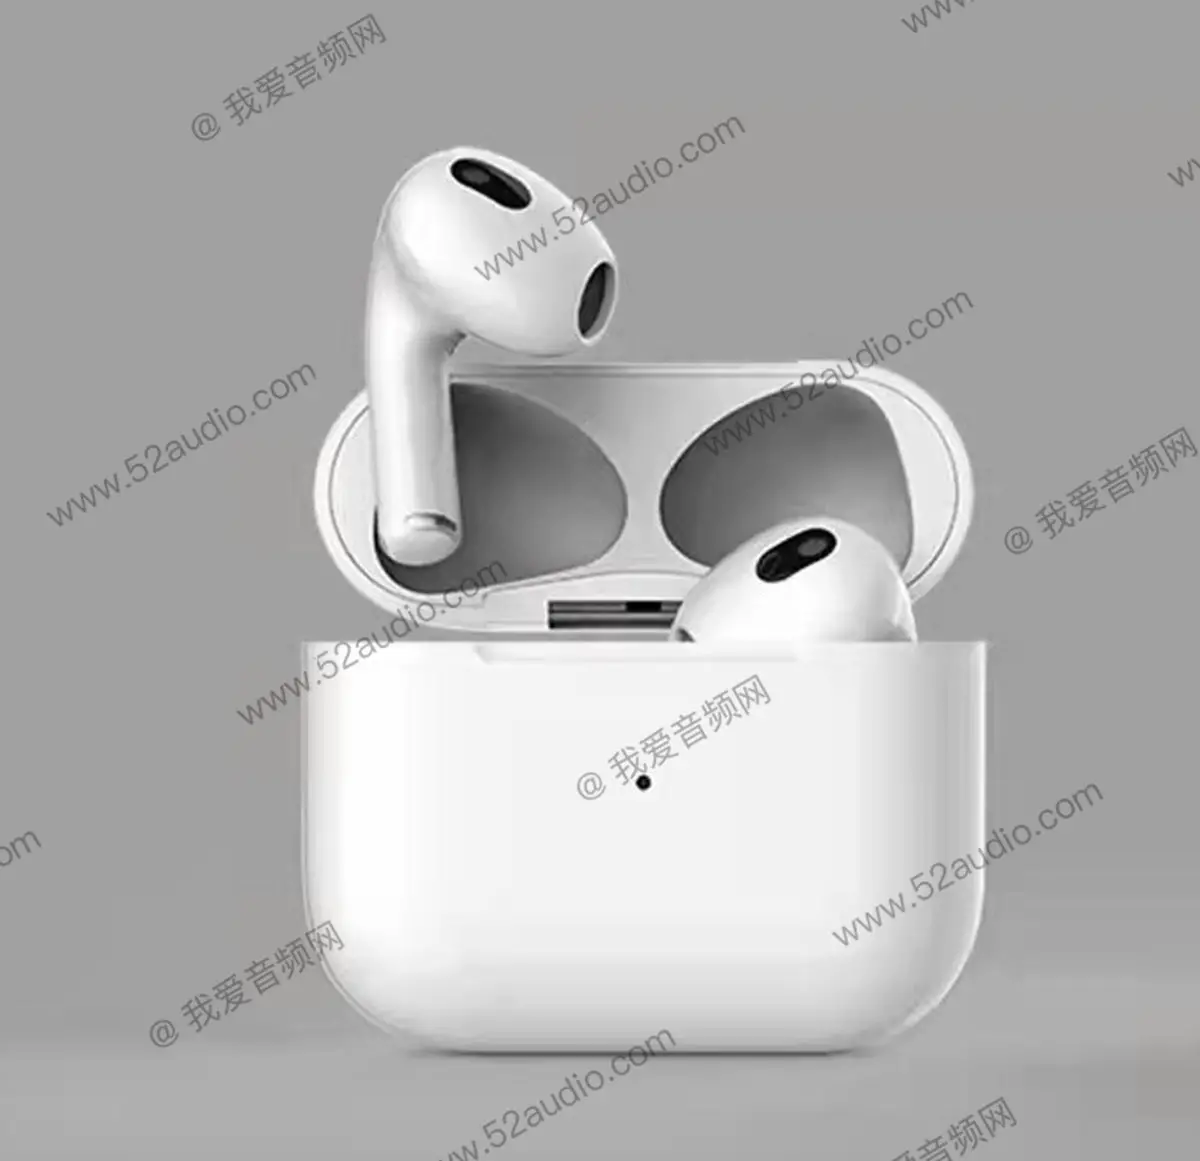 AirPods 3rd Generation